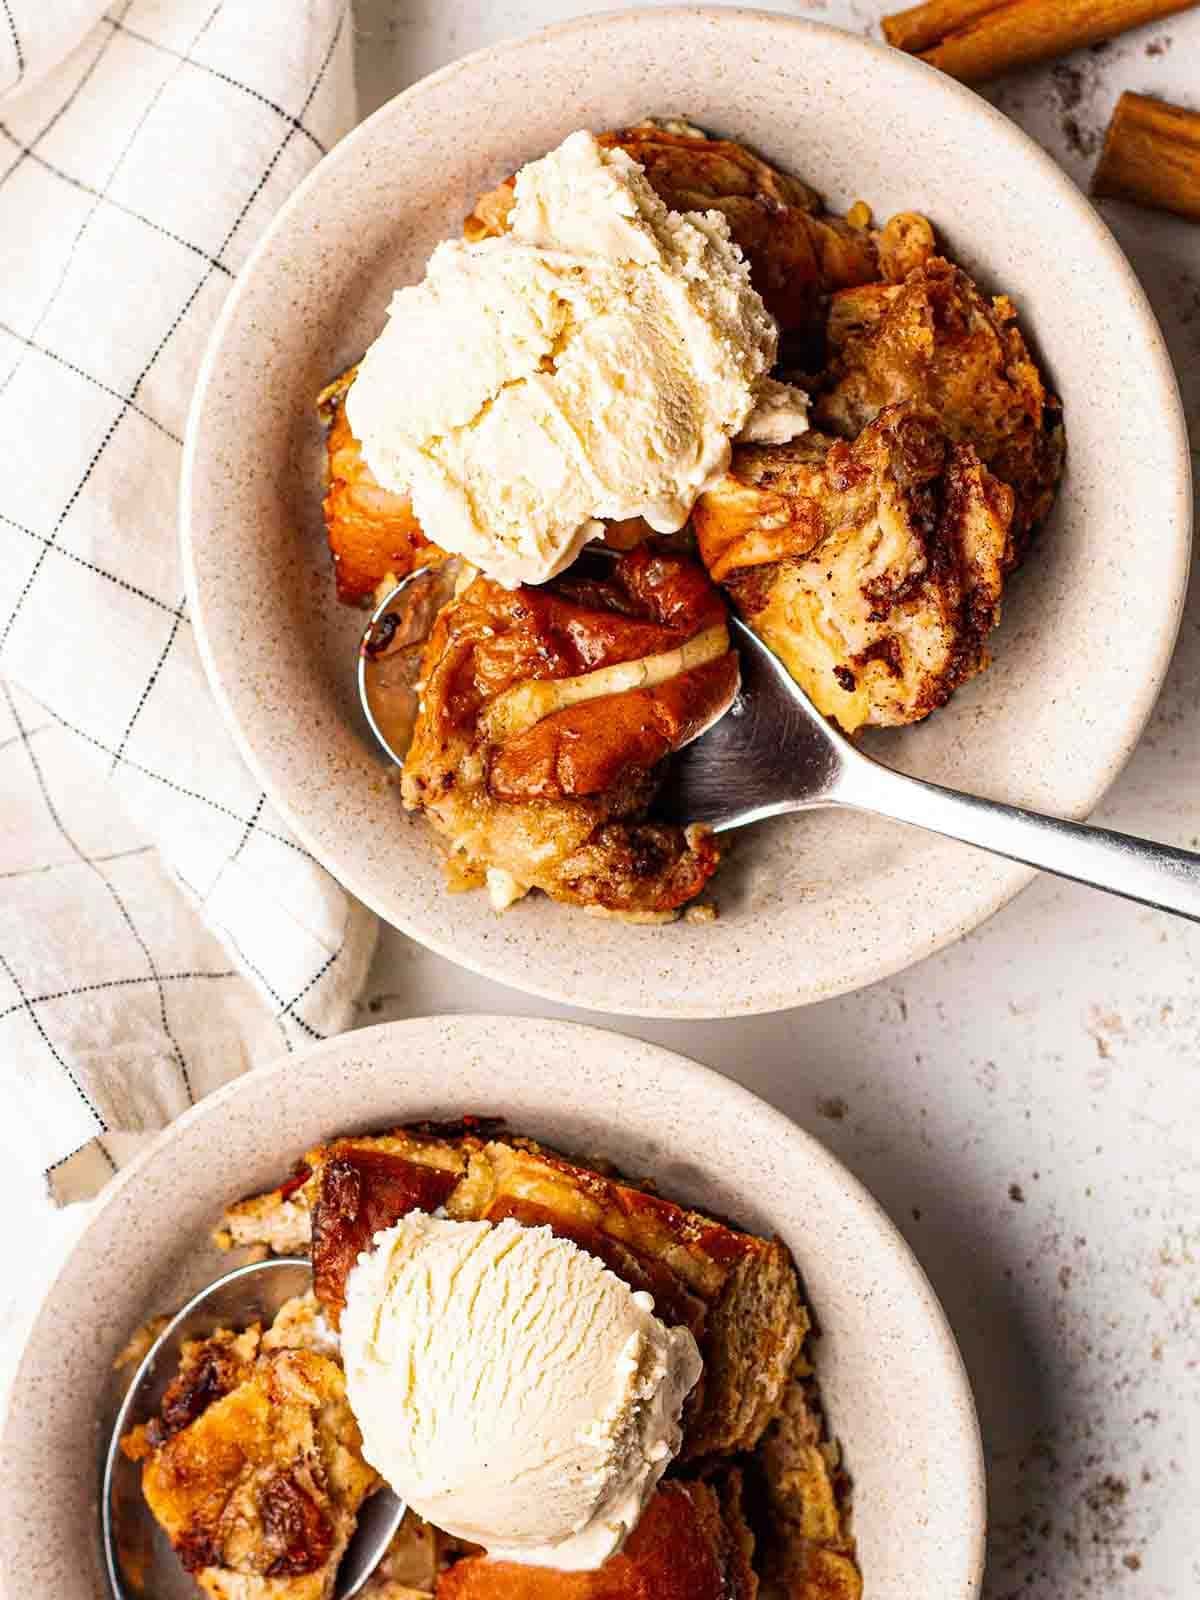 Two bowls with ice cream and cooked Hot Cross Bun Bread and Butter Pudding, with a spoon ready to eat.